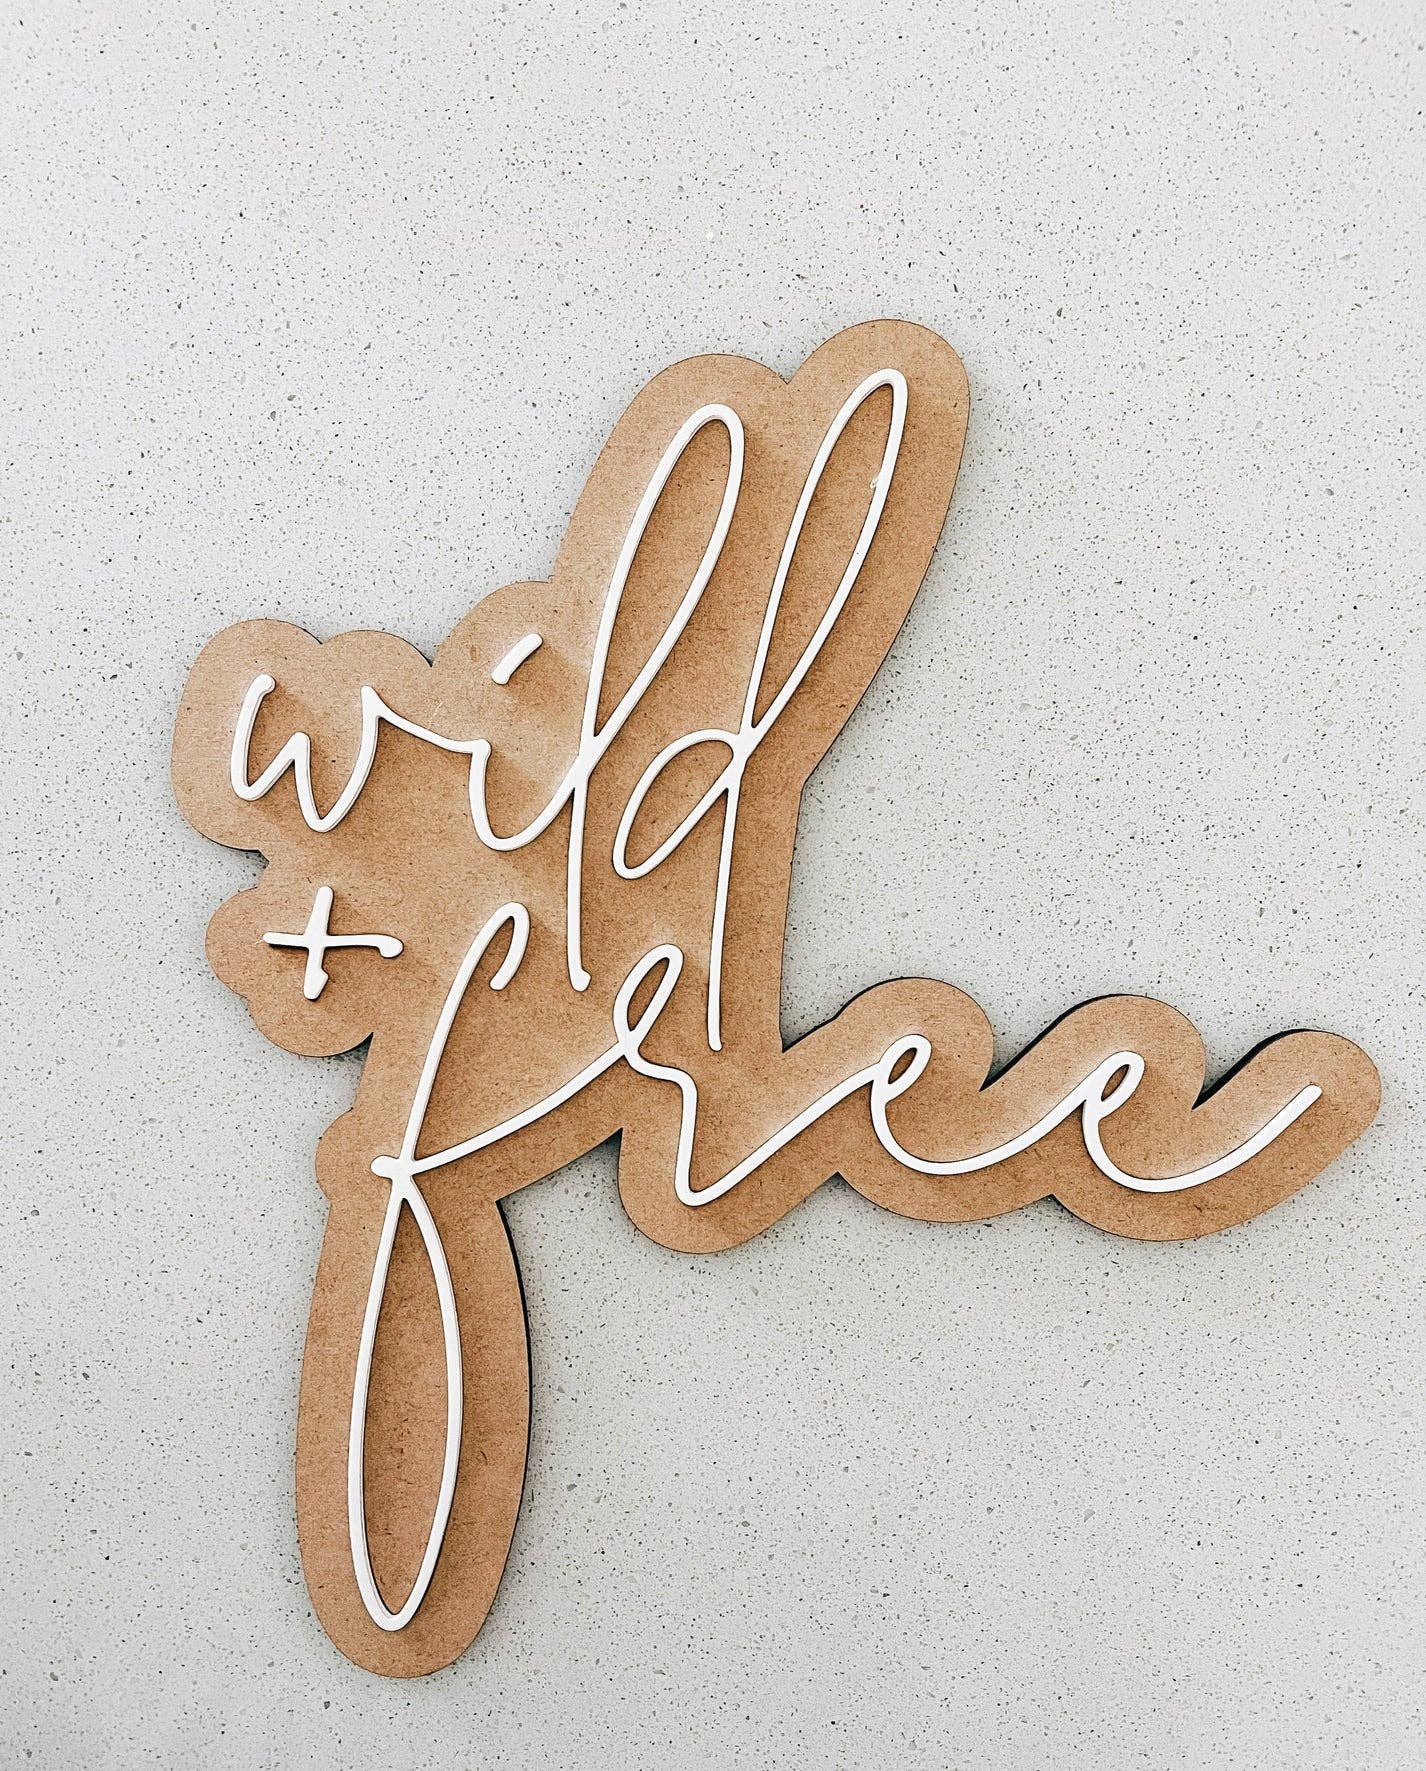 Wild and Free Sign